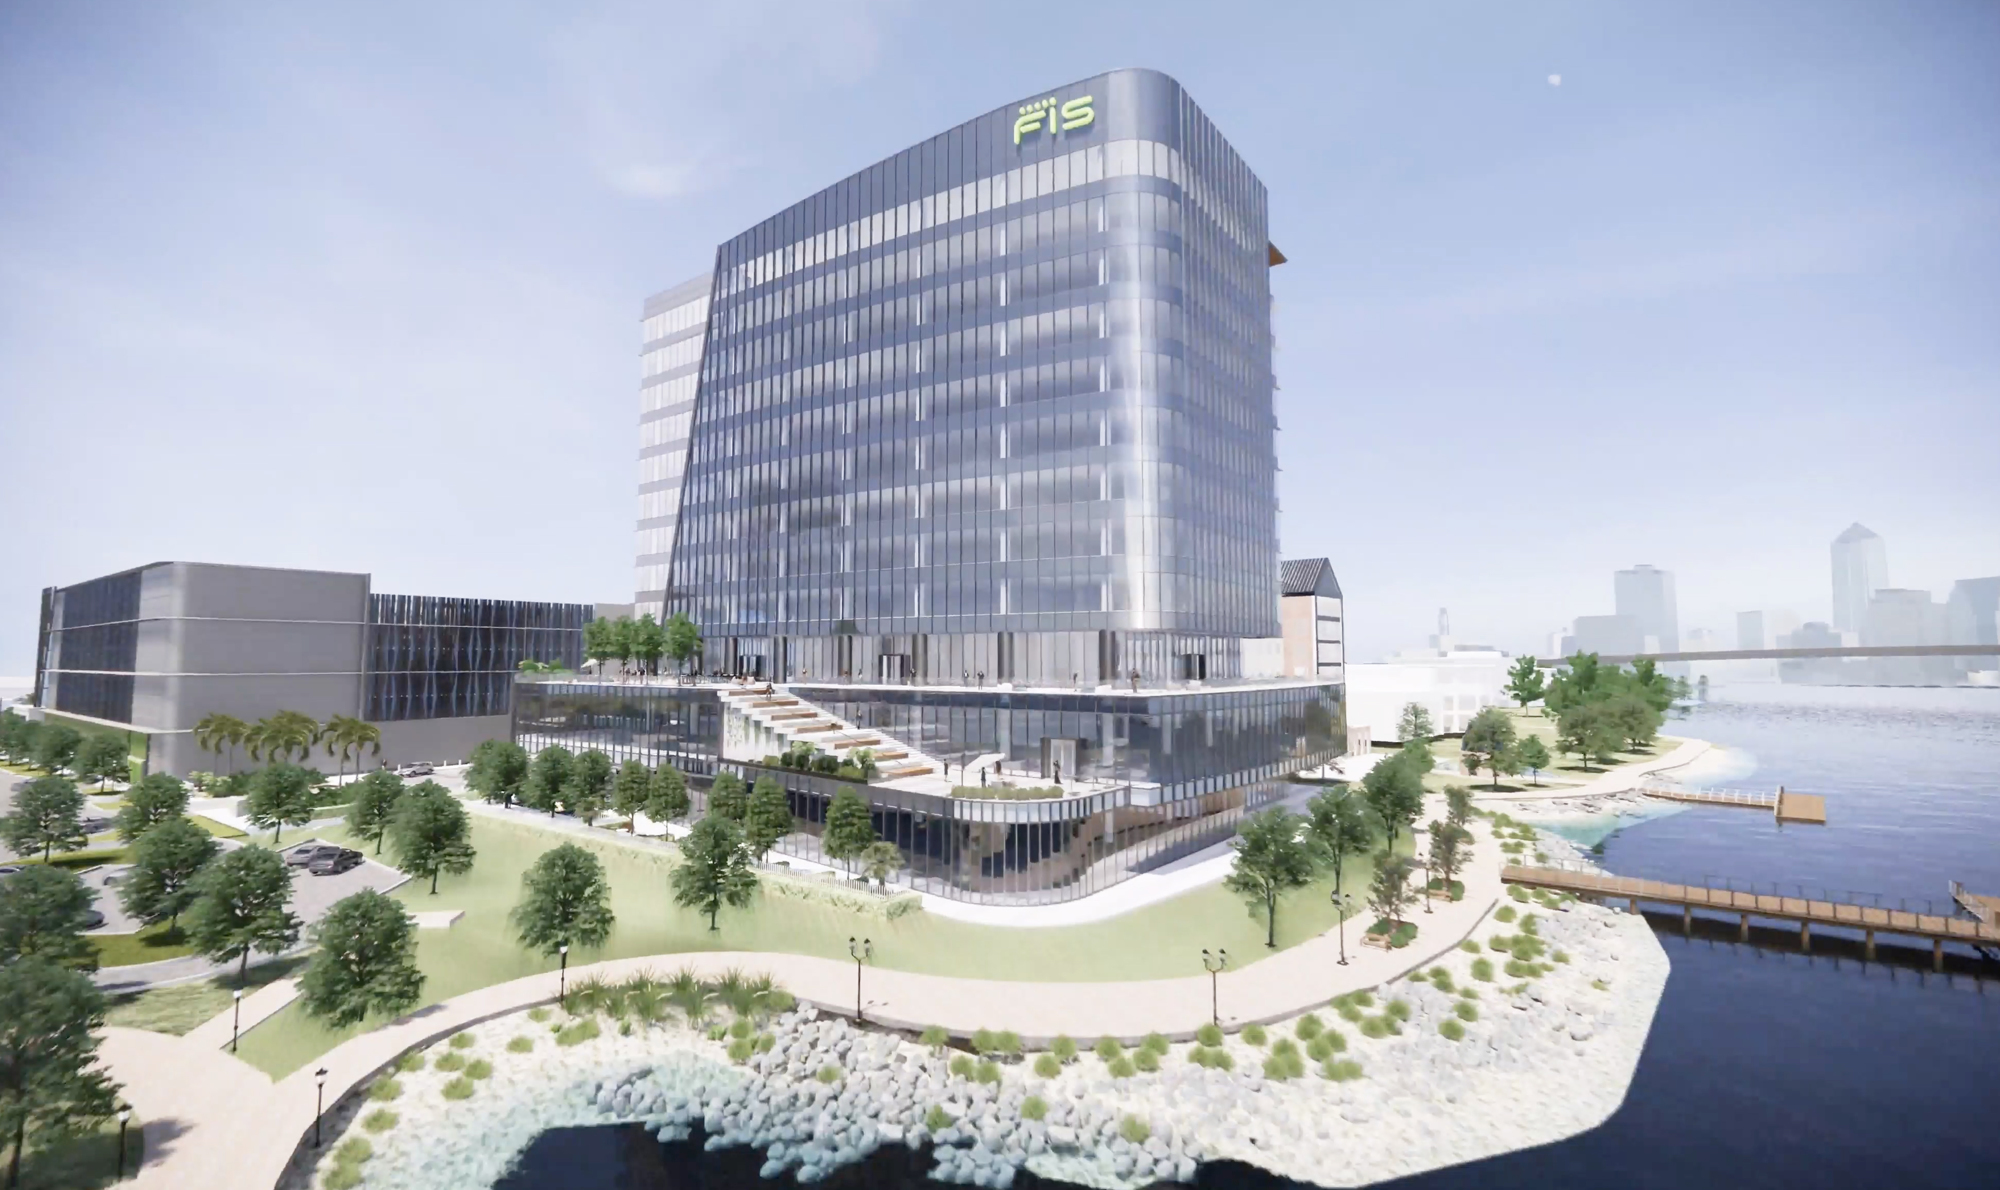 An artist's rendering of the new FIS world headquarters.